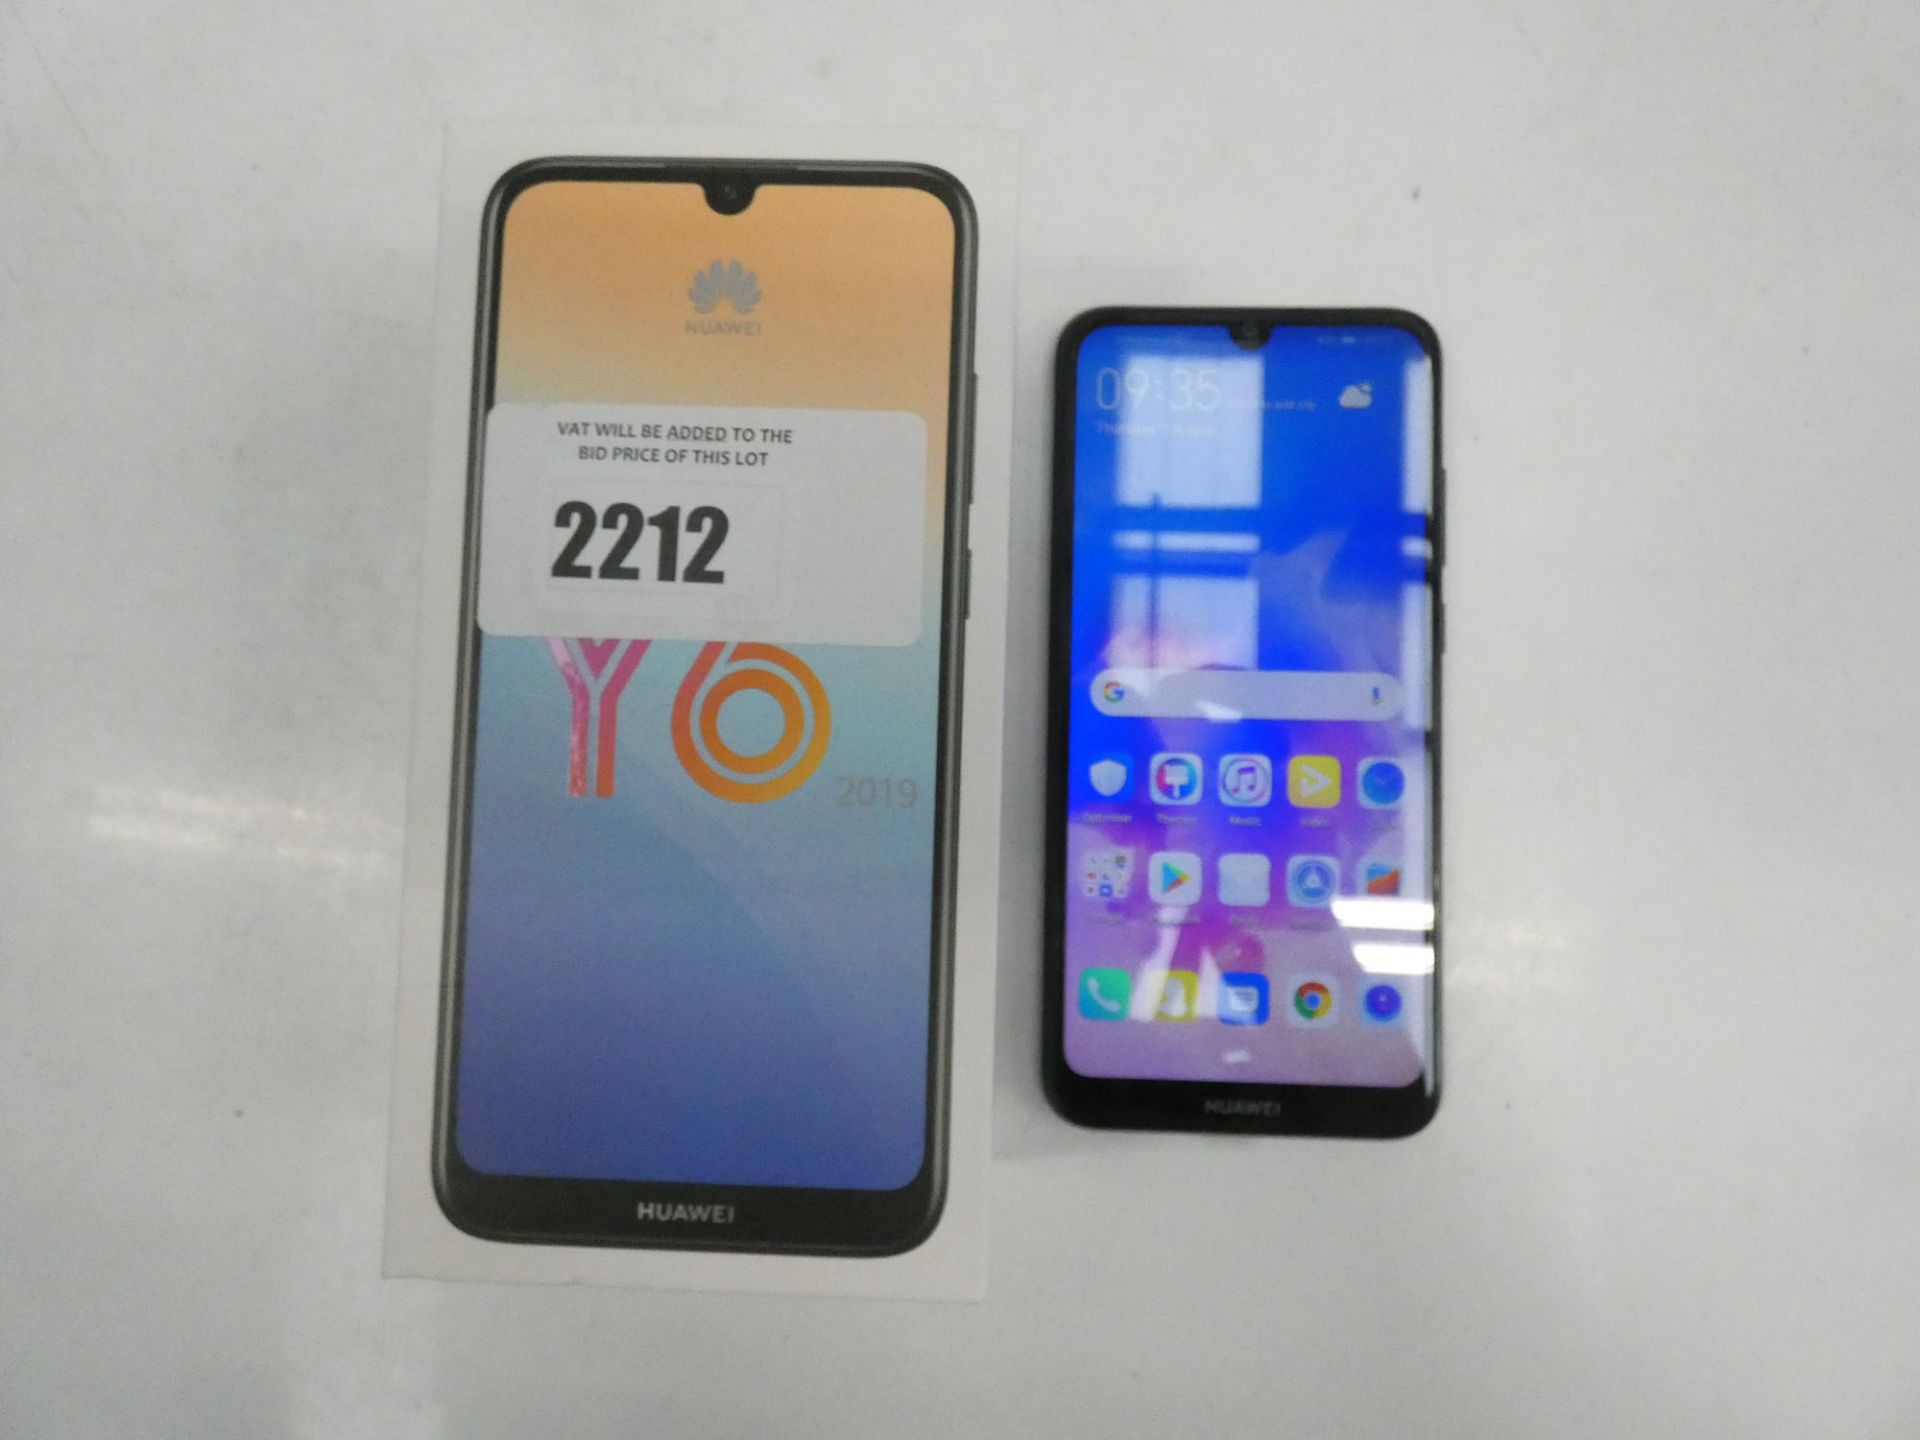 Huawei Y6 2019 smartphone with box